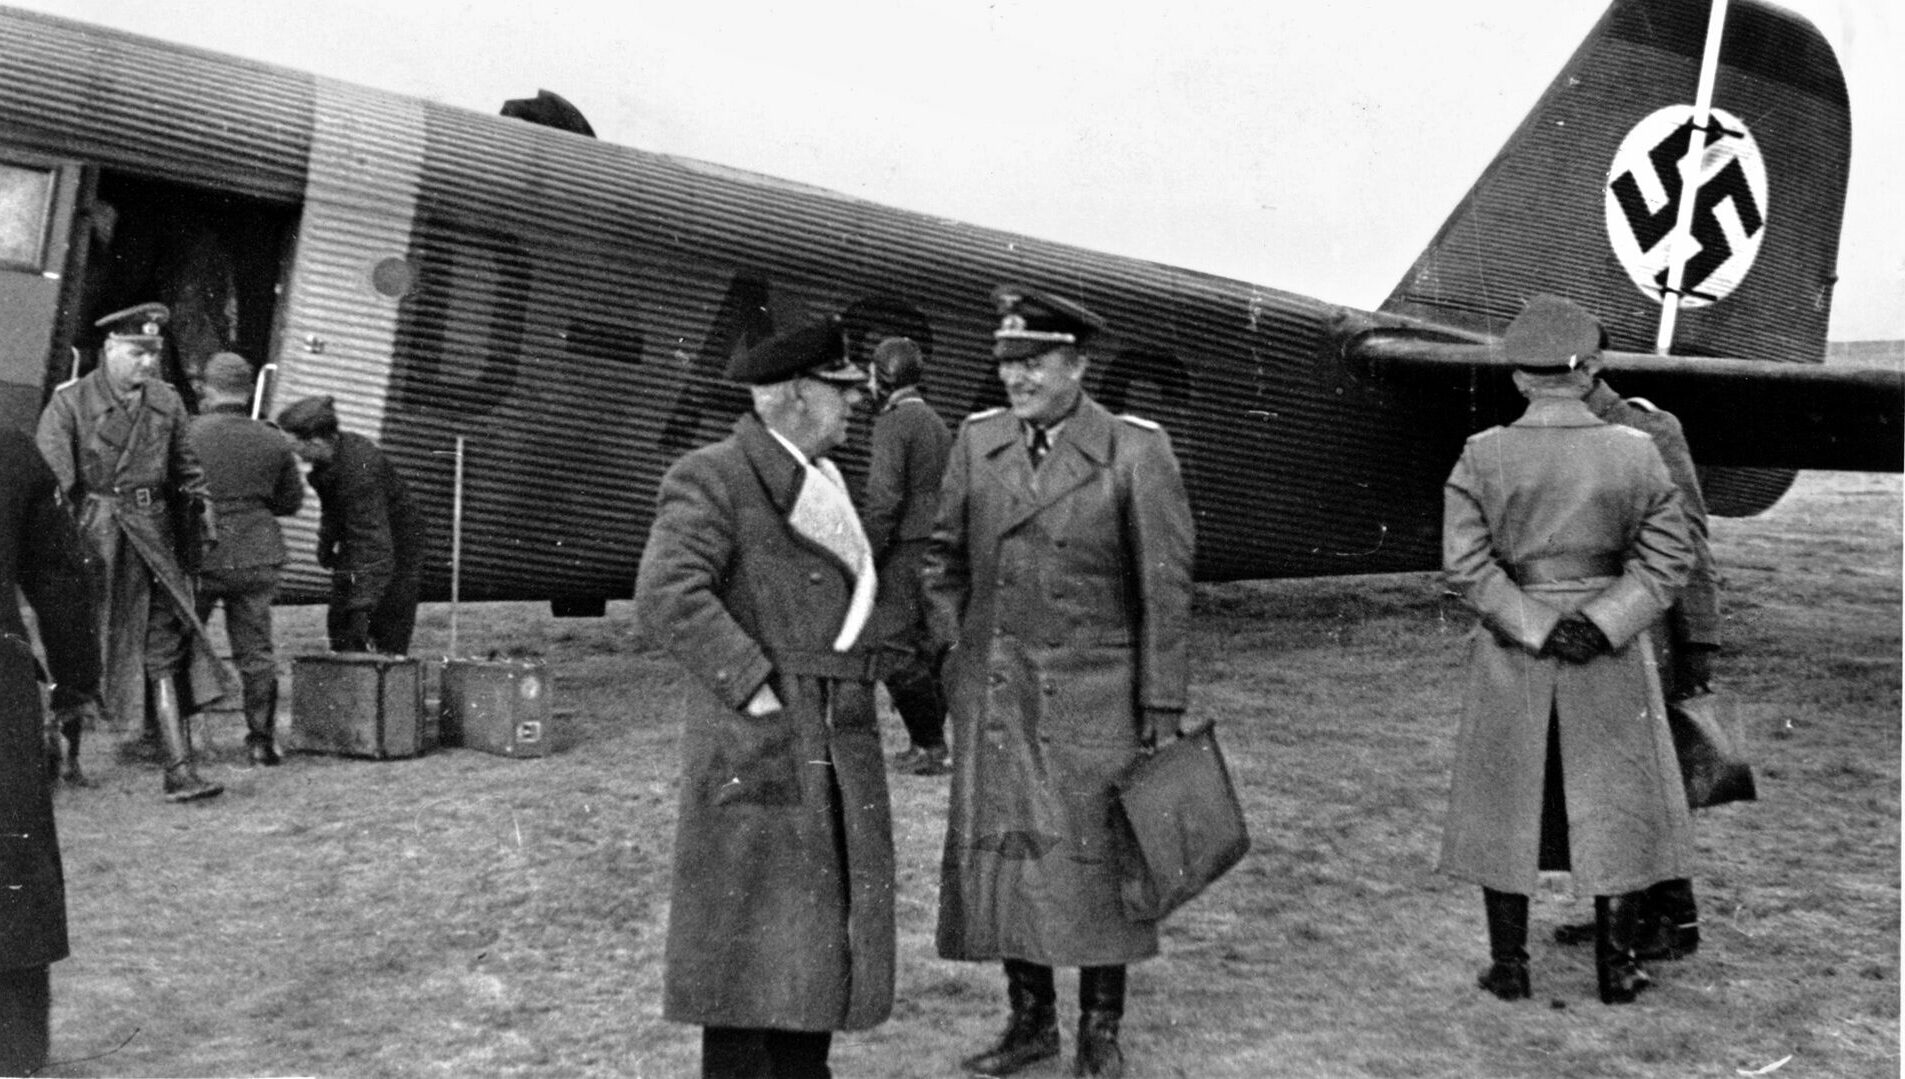 Admiral Wilhelm Canaris pictured with Colonel Franz Eccard von Bentivegni, an Abwehr counterespionage expert, in Smolensk in Octo- ber 1941. Canaris alienated his superiors when visiting the Eastern Front, warning them not to expose German troops needlessly to the hard- ships of the Russian winter.